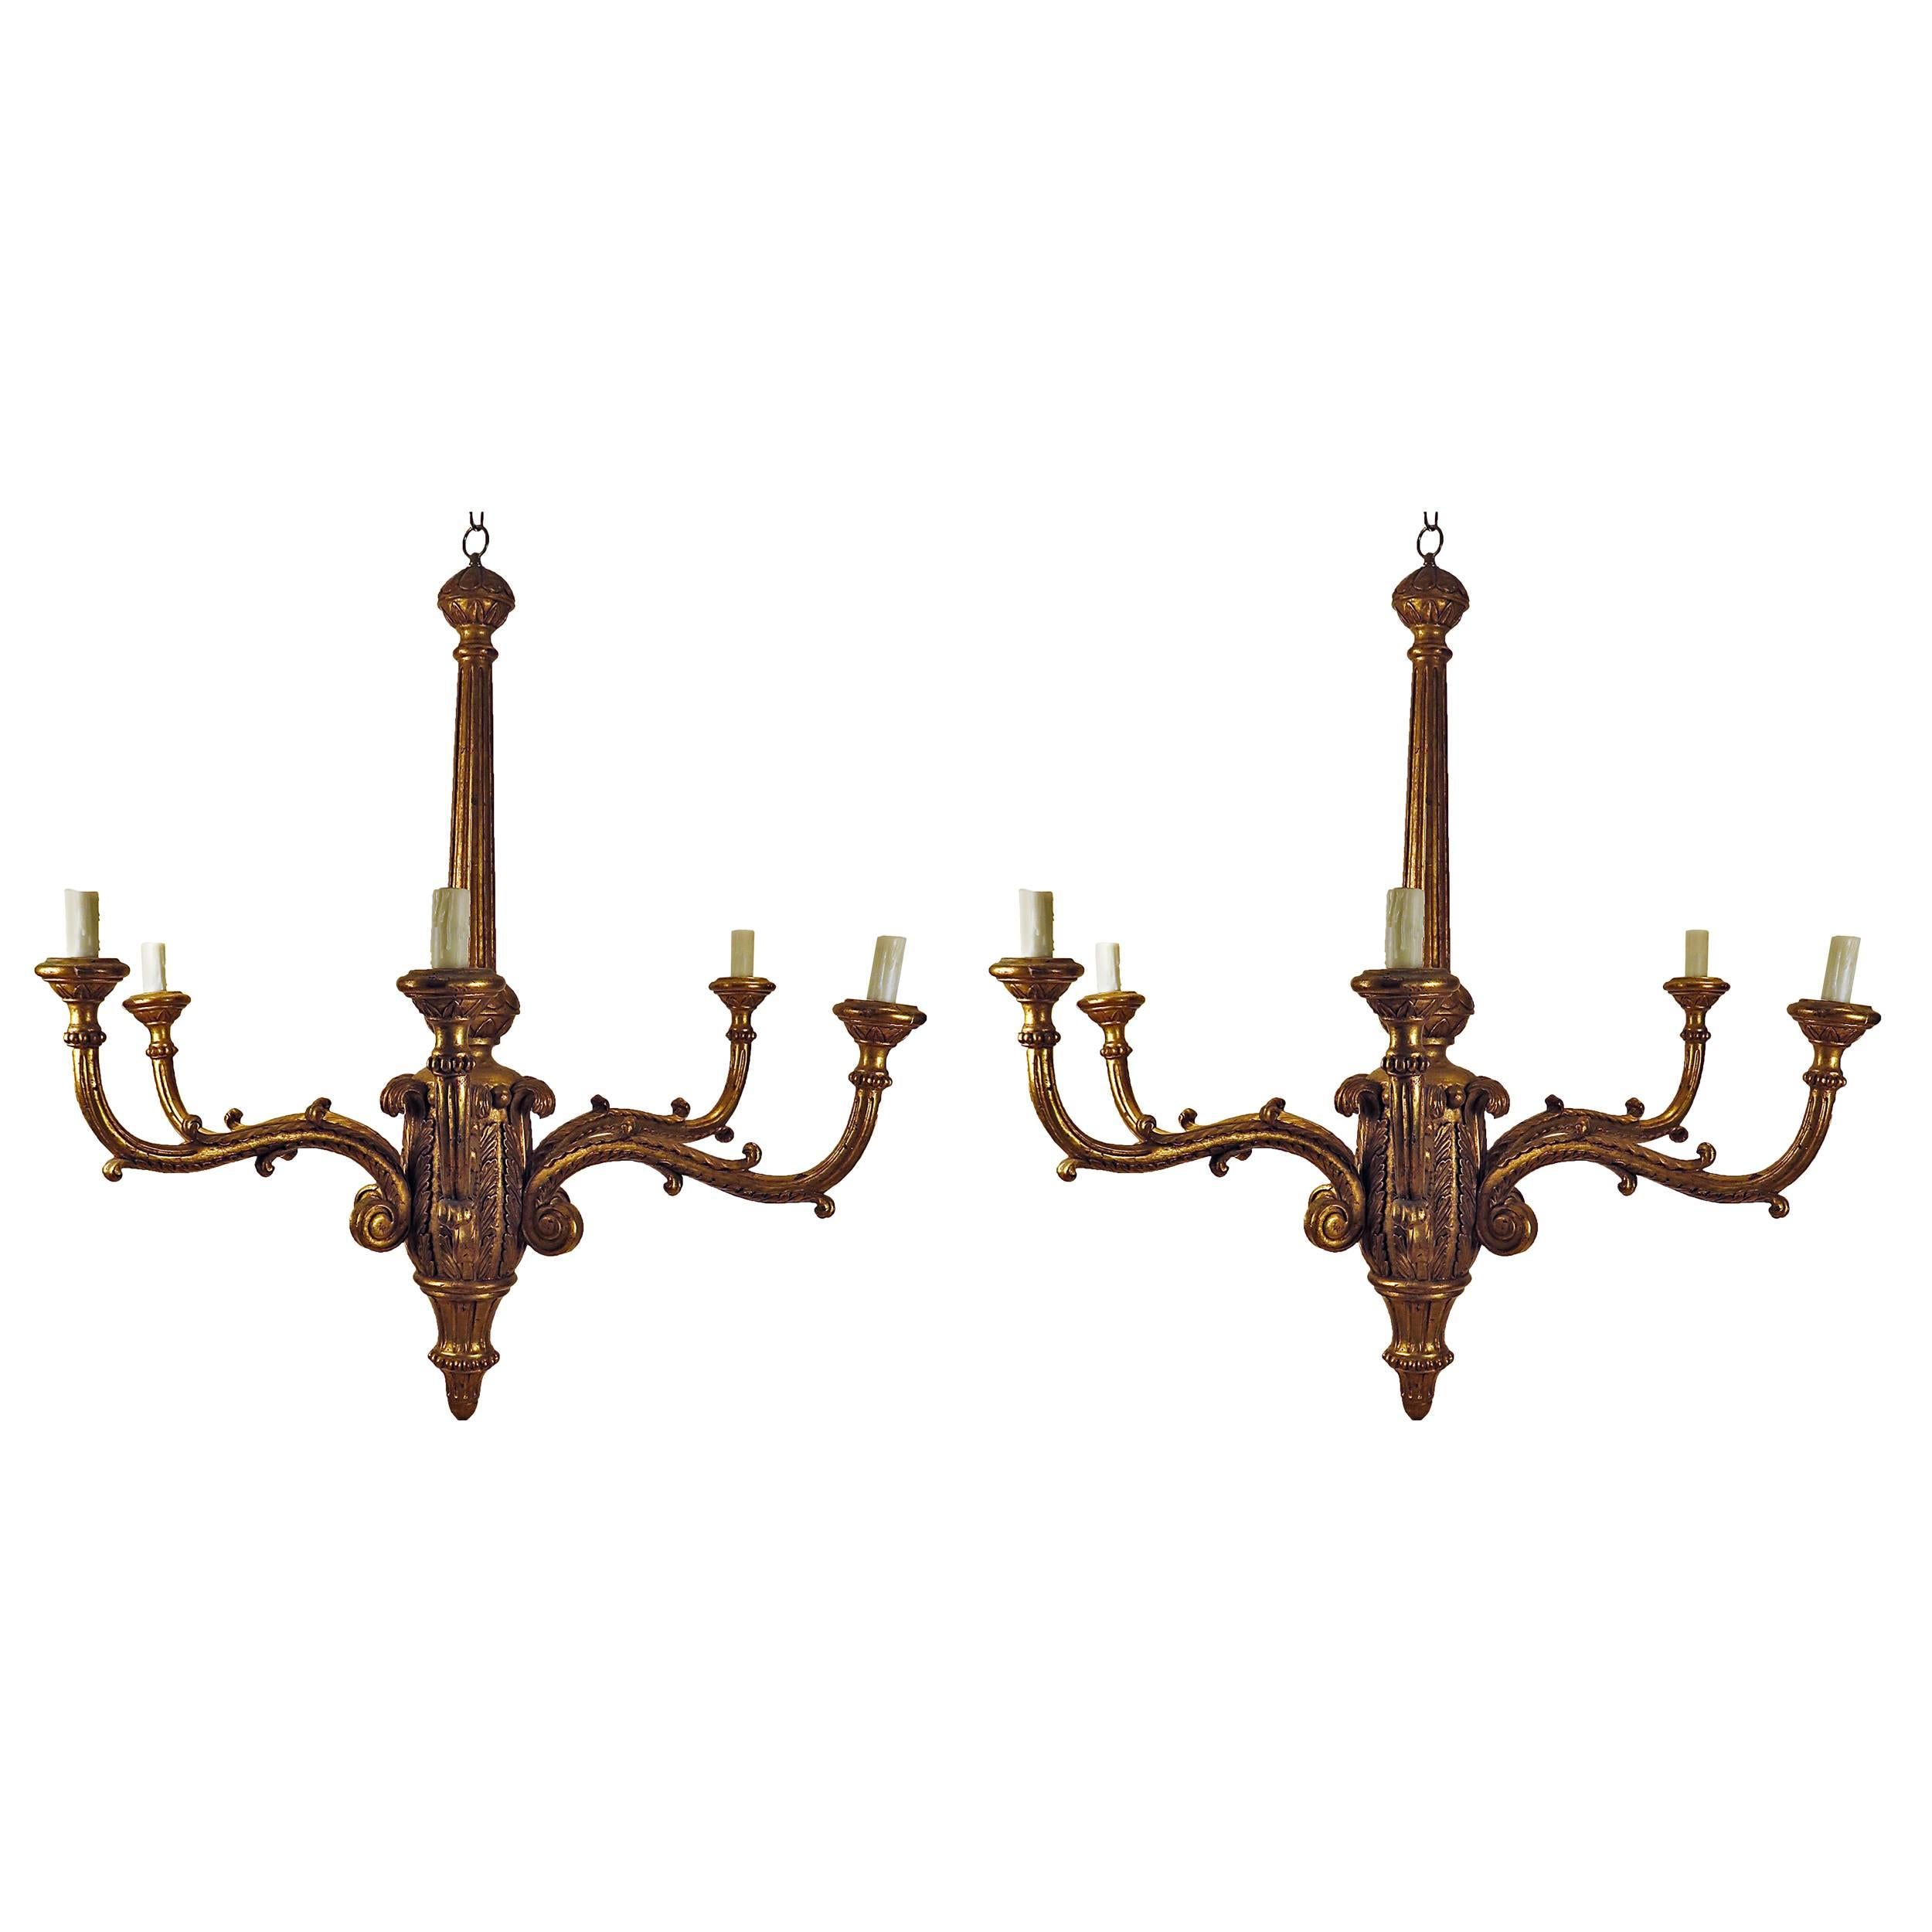 Two Similar Large Belle Époque Gilt wood Chandeliers, Italy, 1910